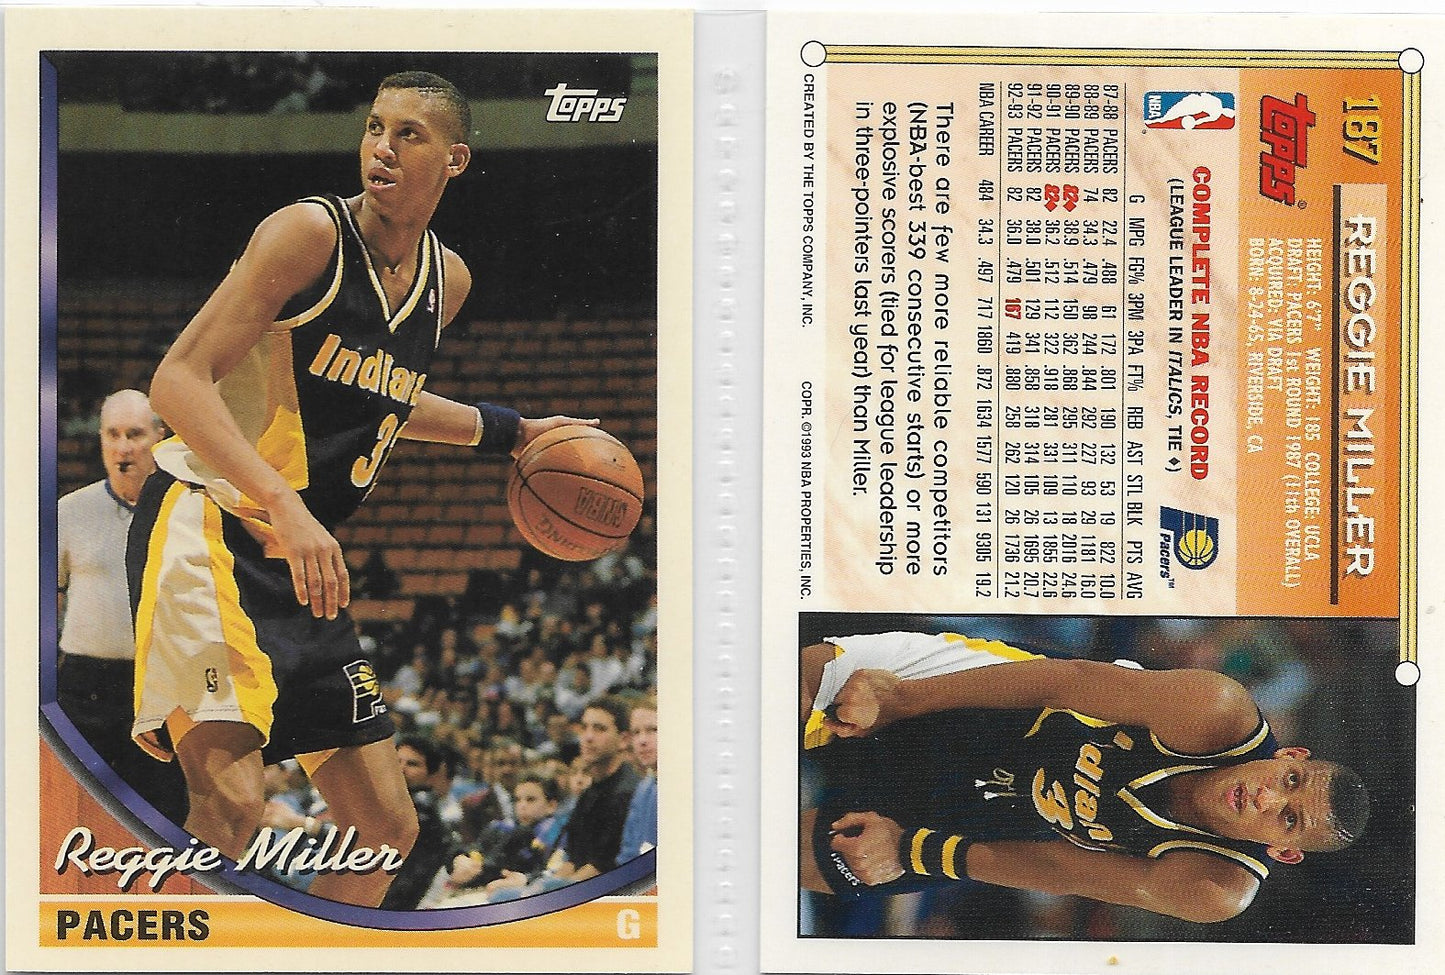 1993 TOPPS #187 HALL OF FAME PLAYERS - REGGIE MILLER - INDIANA PACERS